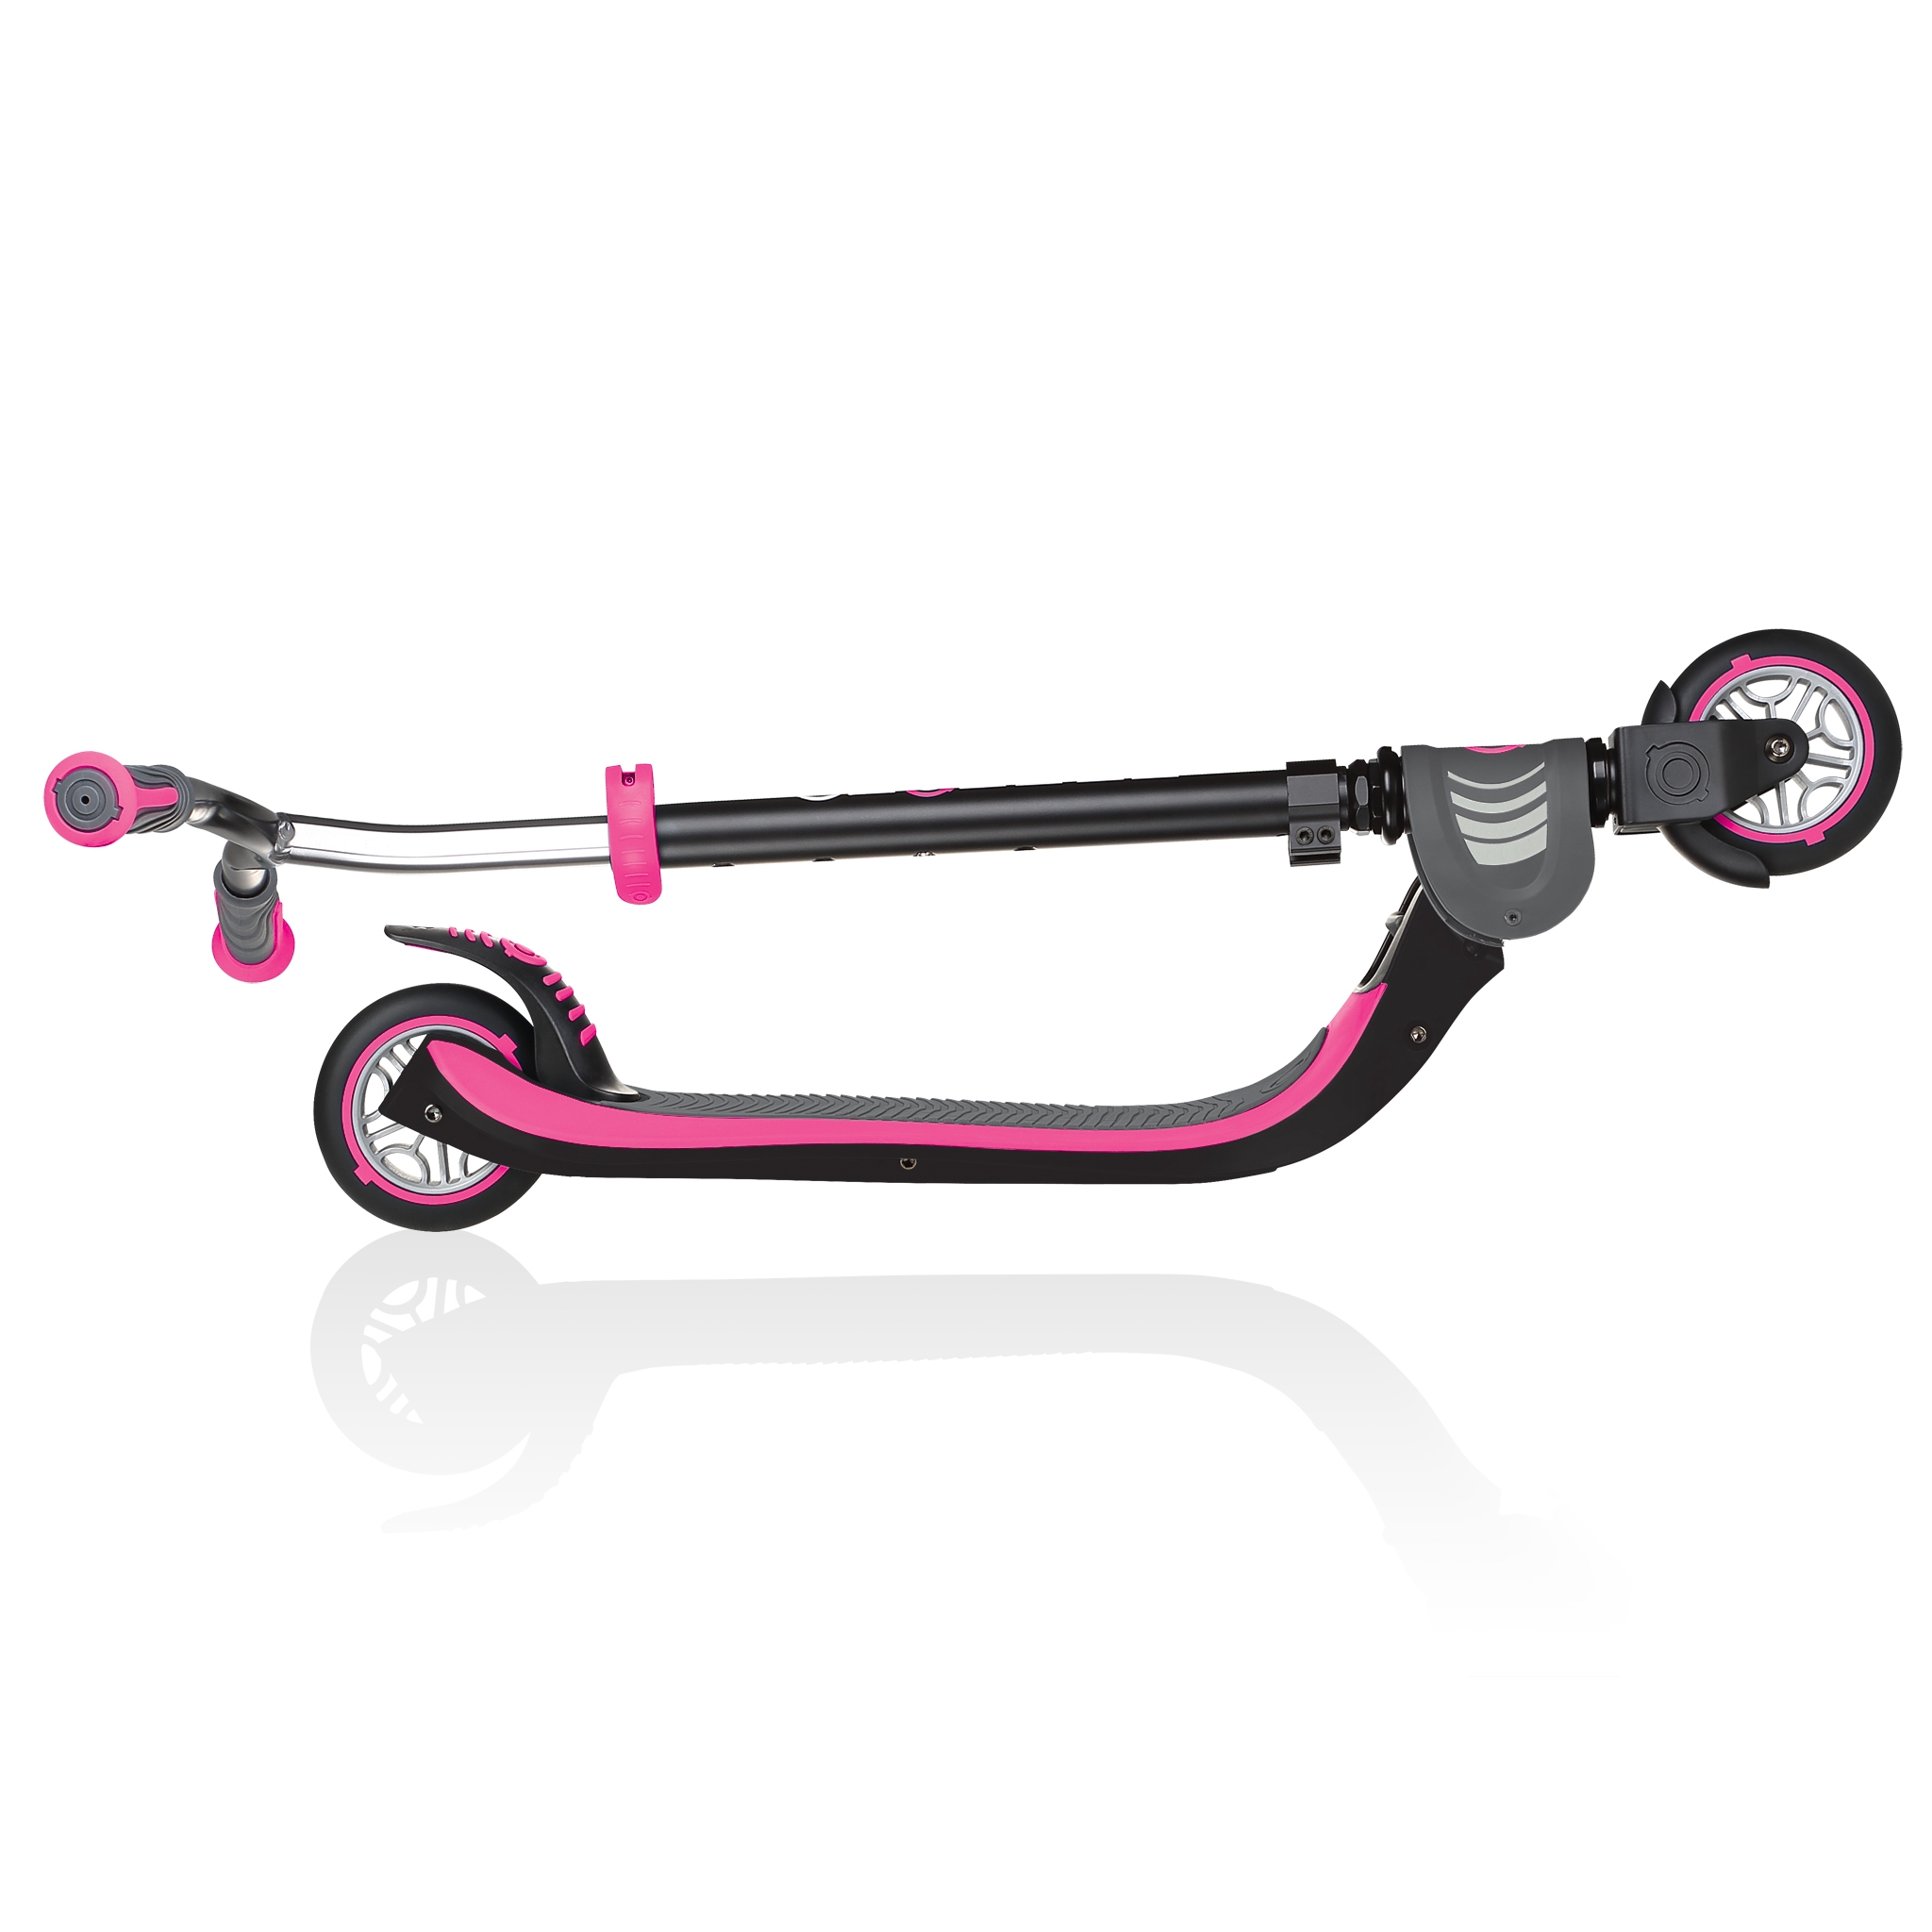 FLOW-FOLDABLE-125-2-wheel-foldable-scooter-for-kids-deep-pink 1